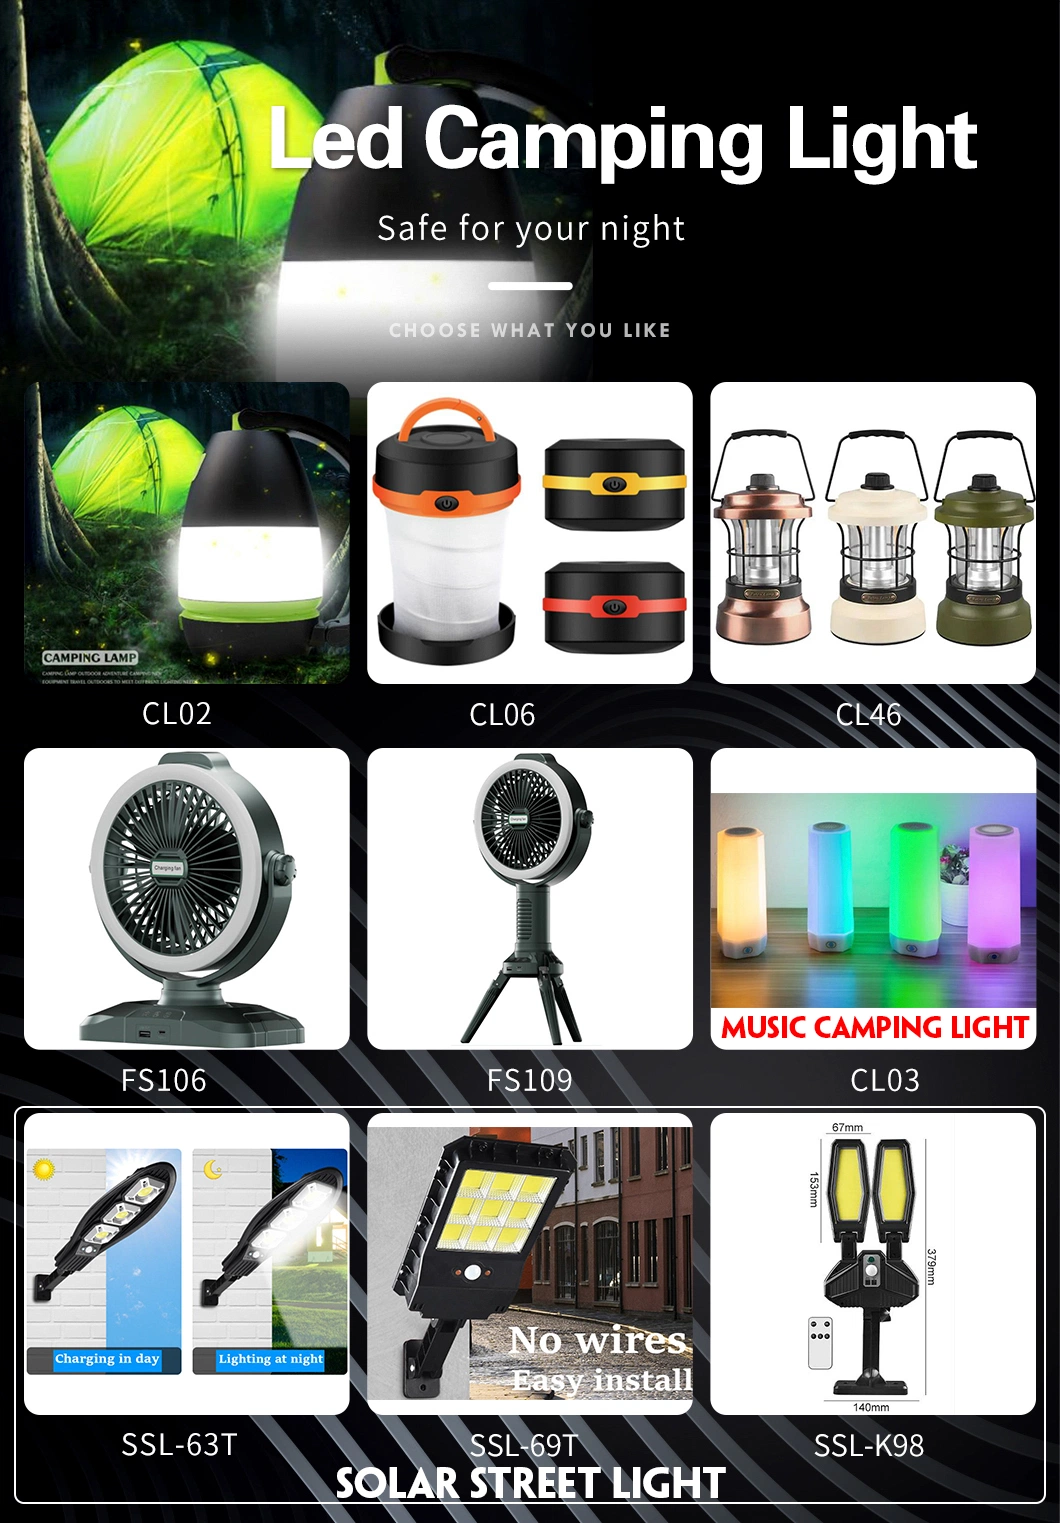 Distance COB Flood Head Light Lamp USB Rechargeable Headlamps for Night Vision